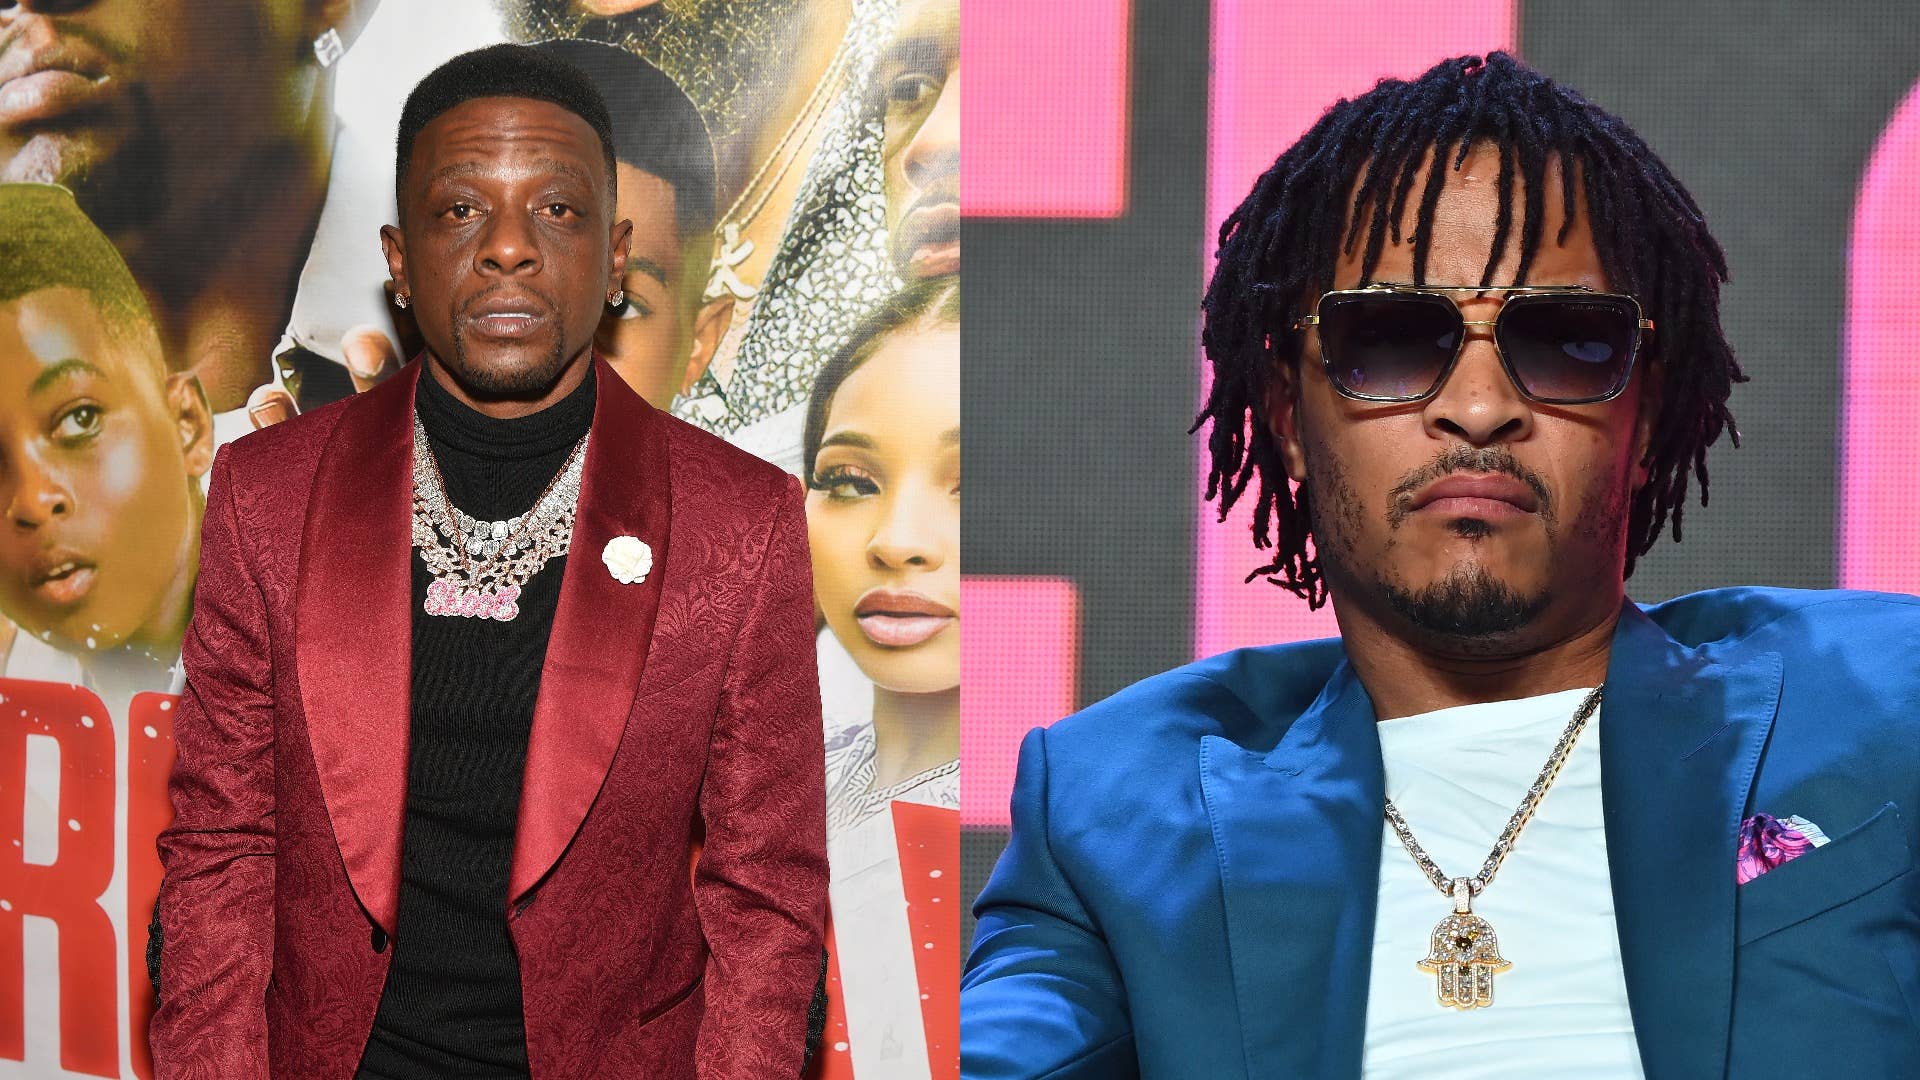 T.I. onstage during 2022 InvestFest; Boosie Badazz attends "Where's MJ?" premiere